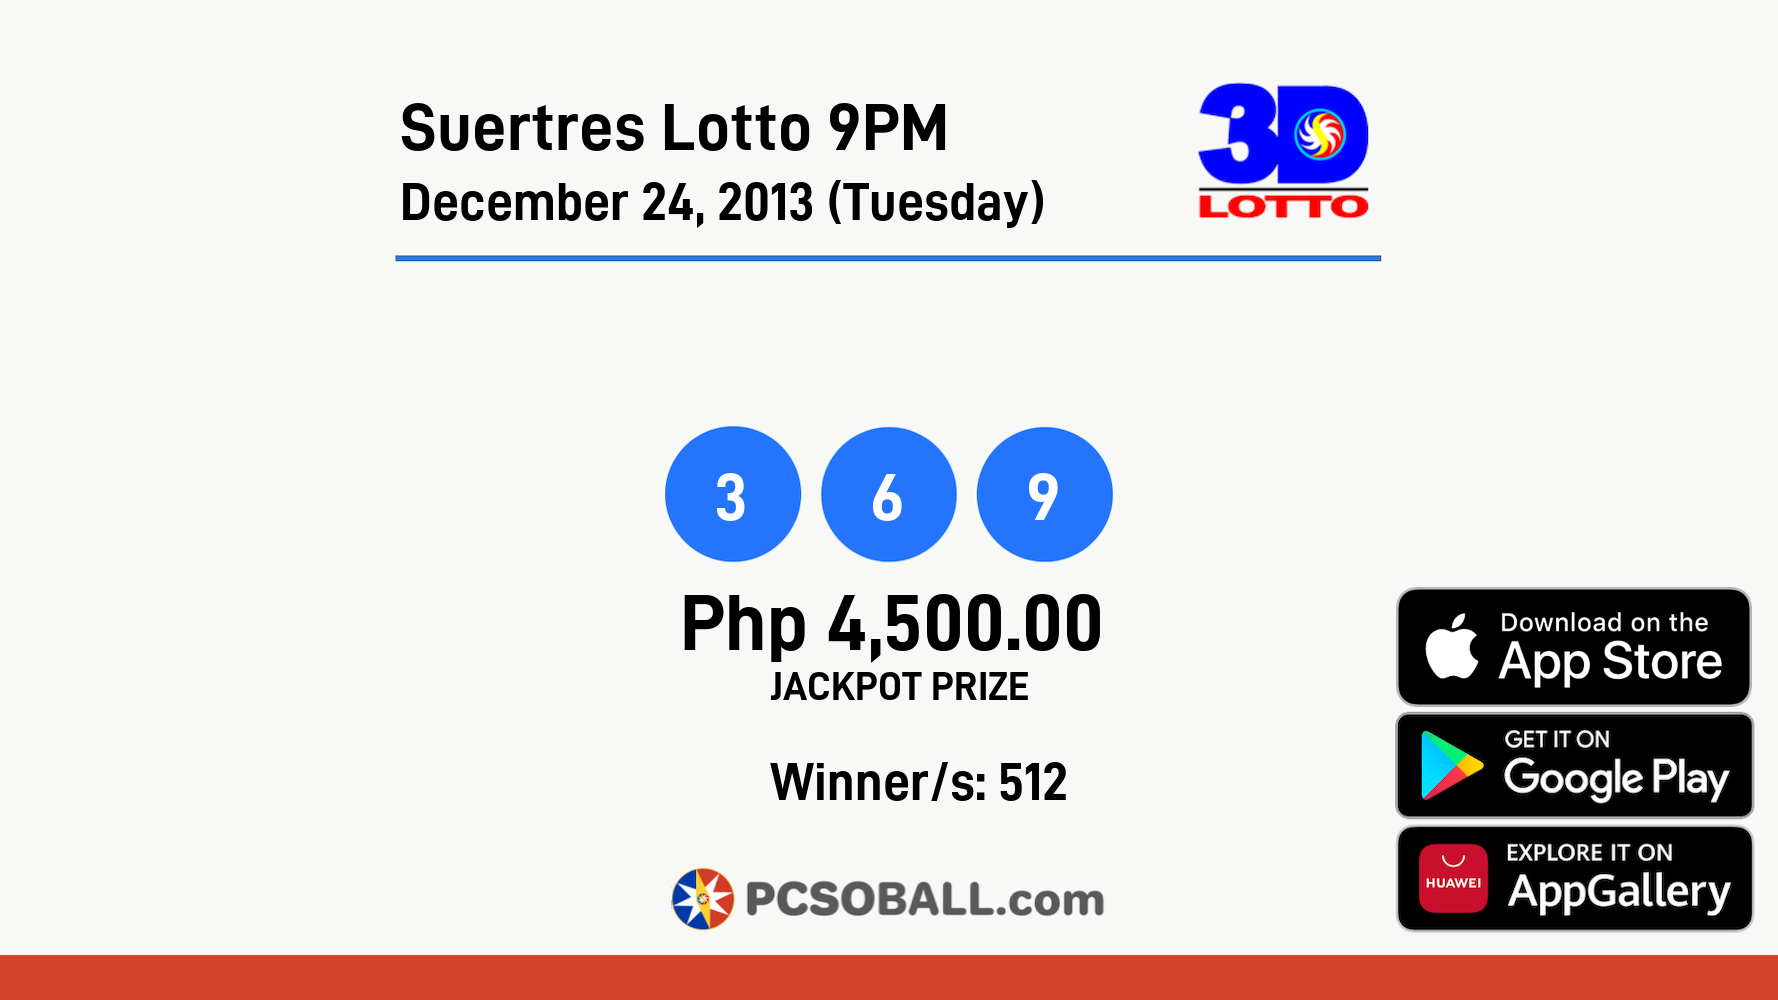 Suertres Lotto 9PM December 24, 2013 (Tuesday) Result